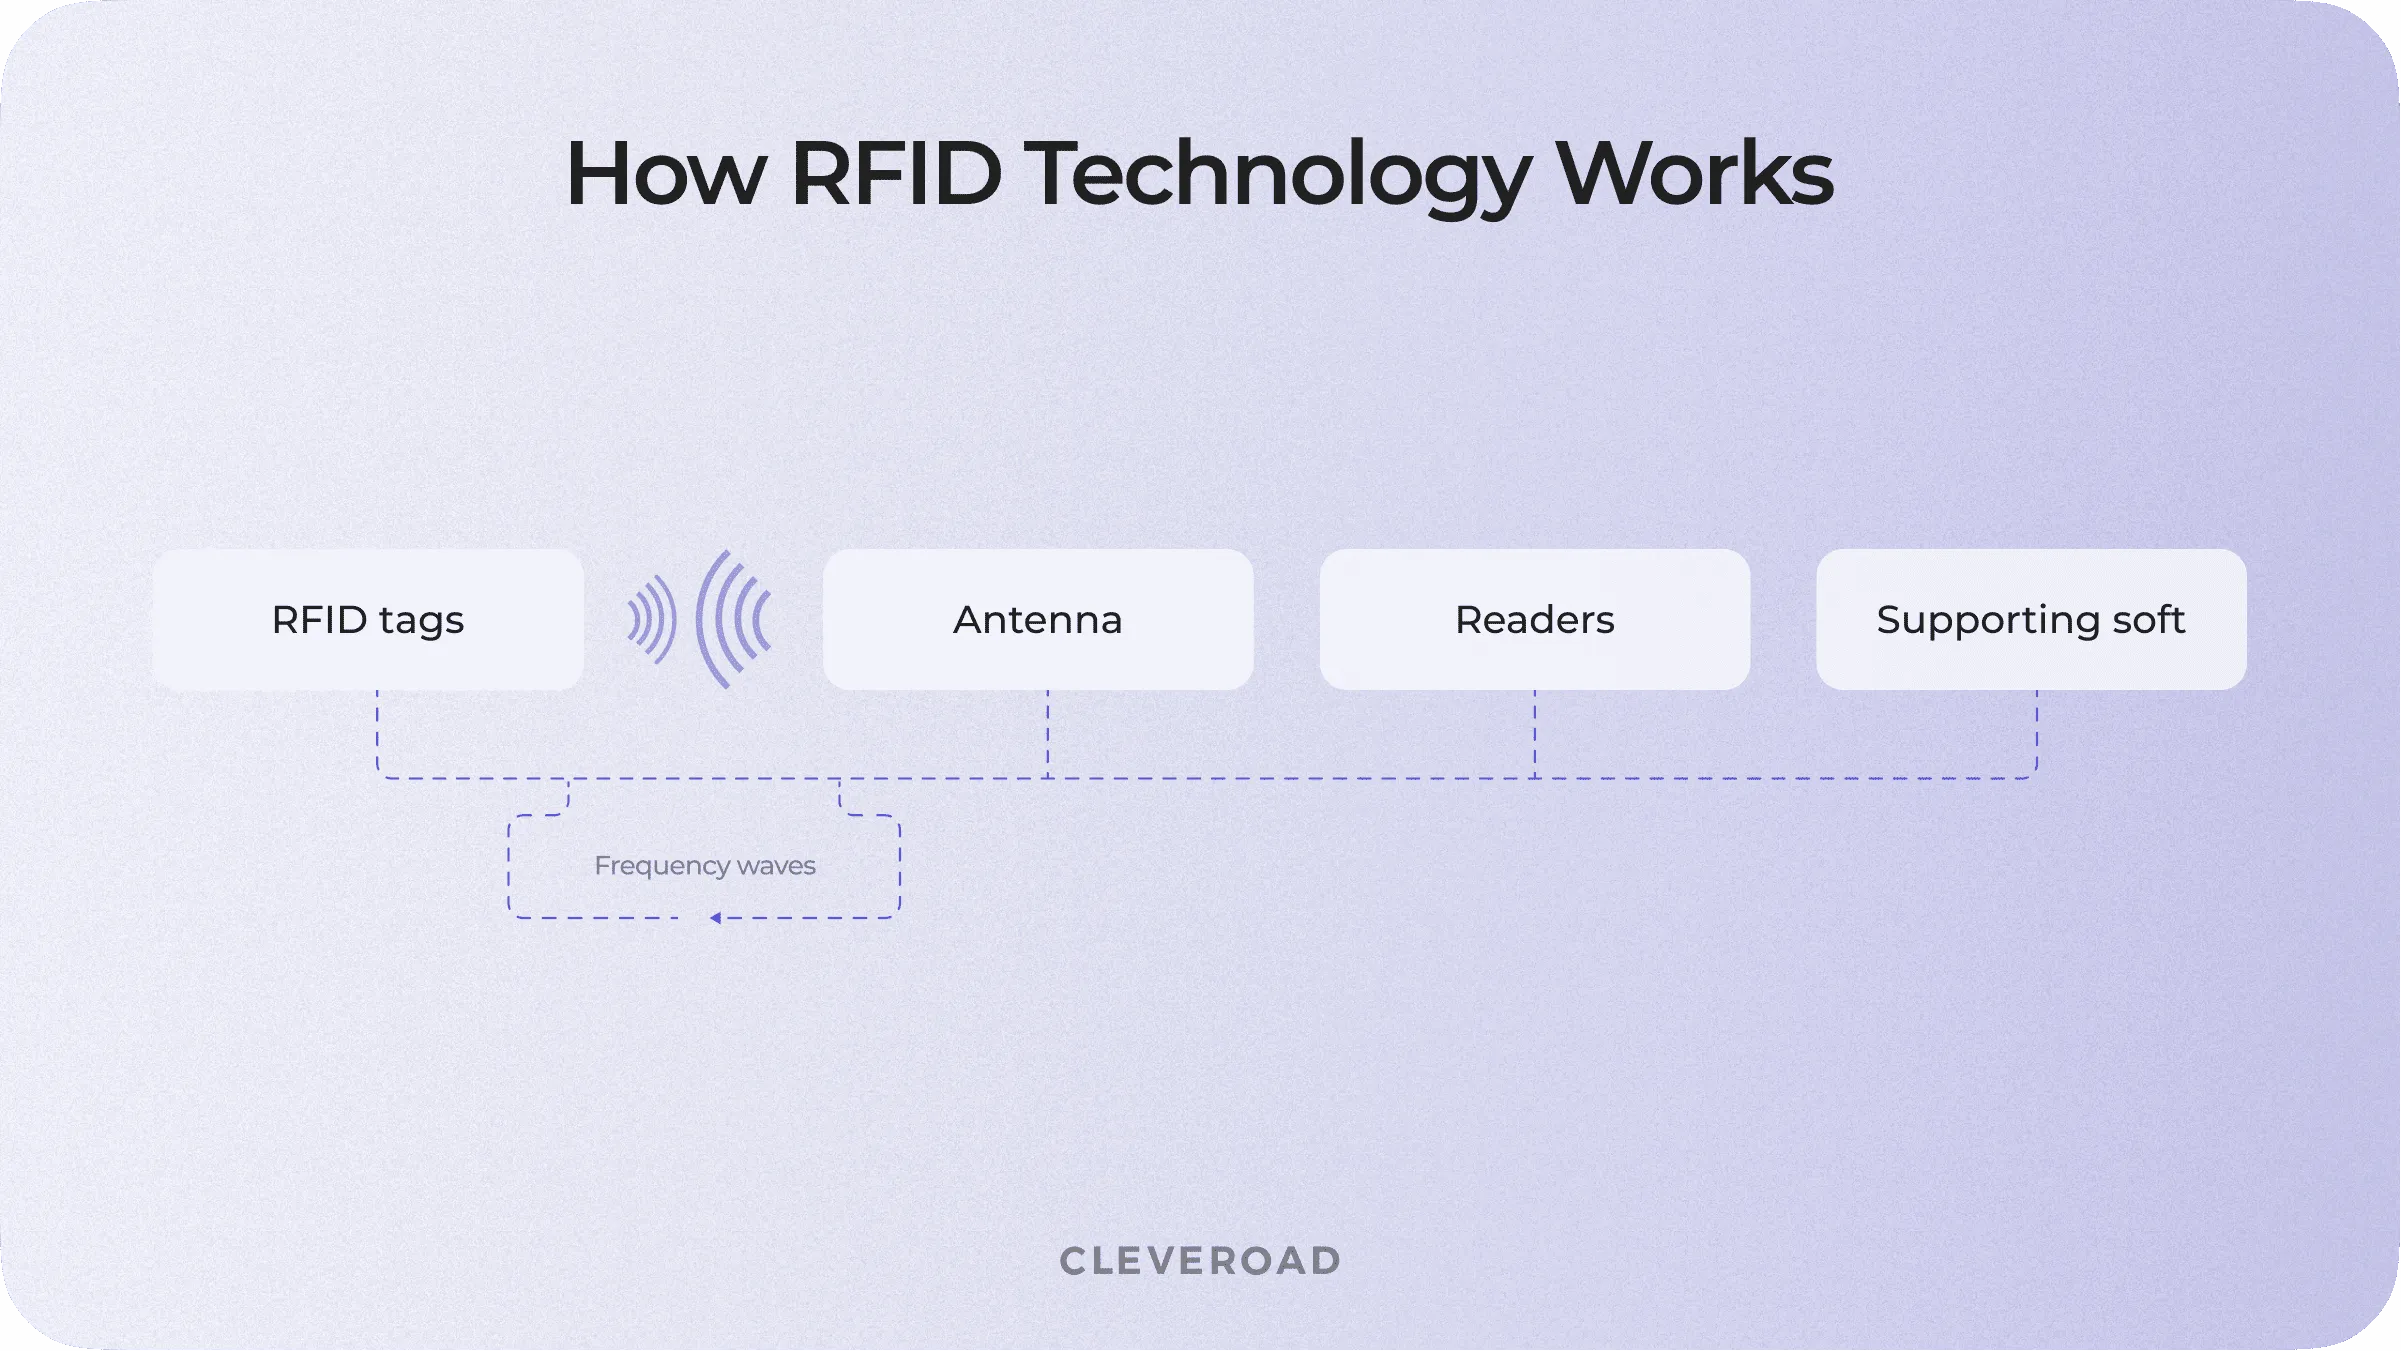 What is RFID technology